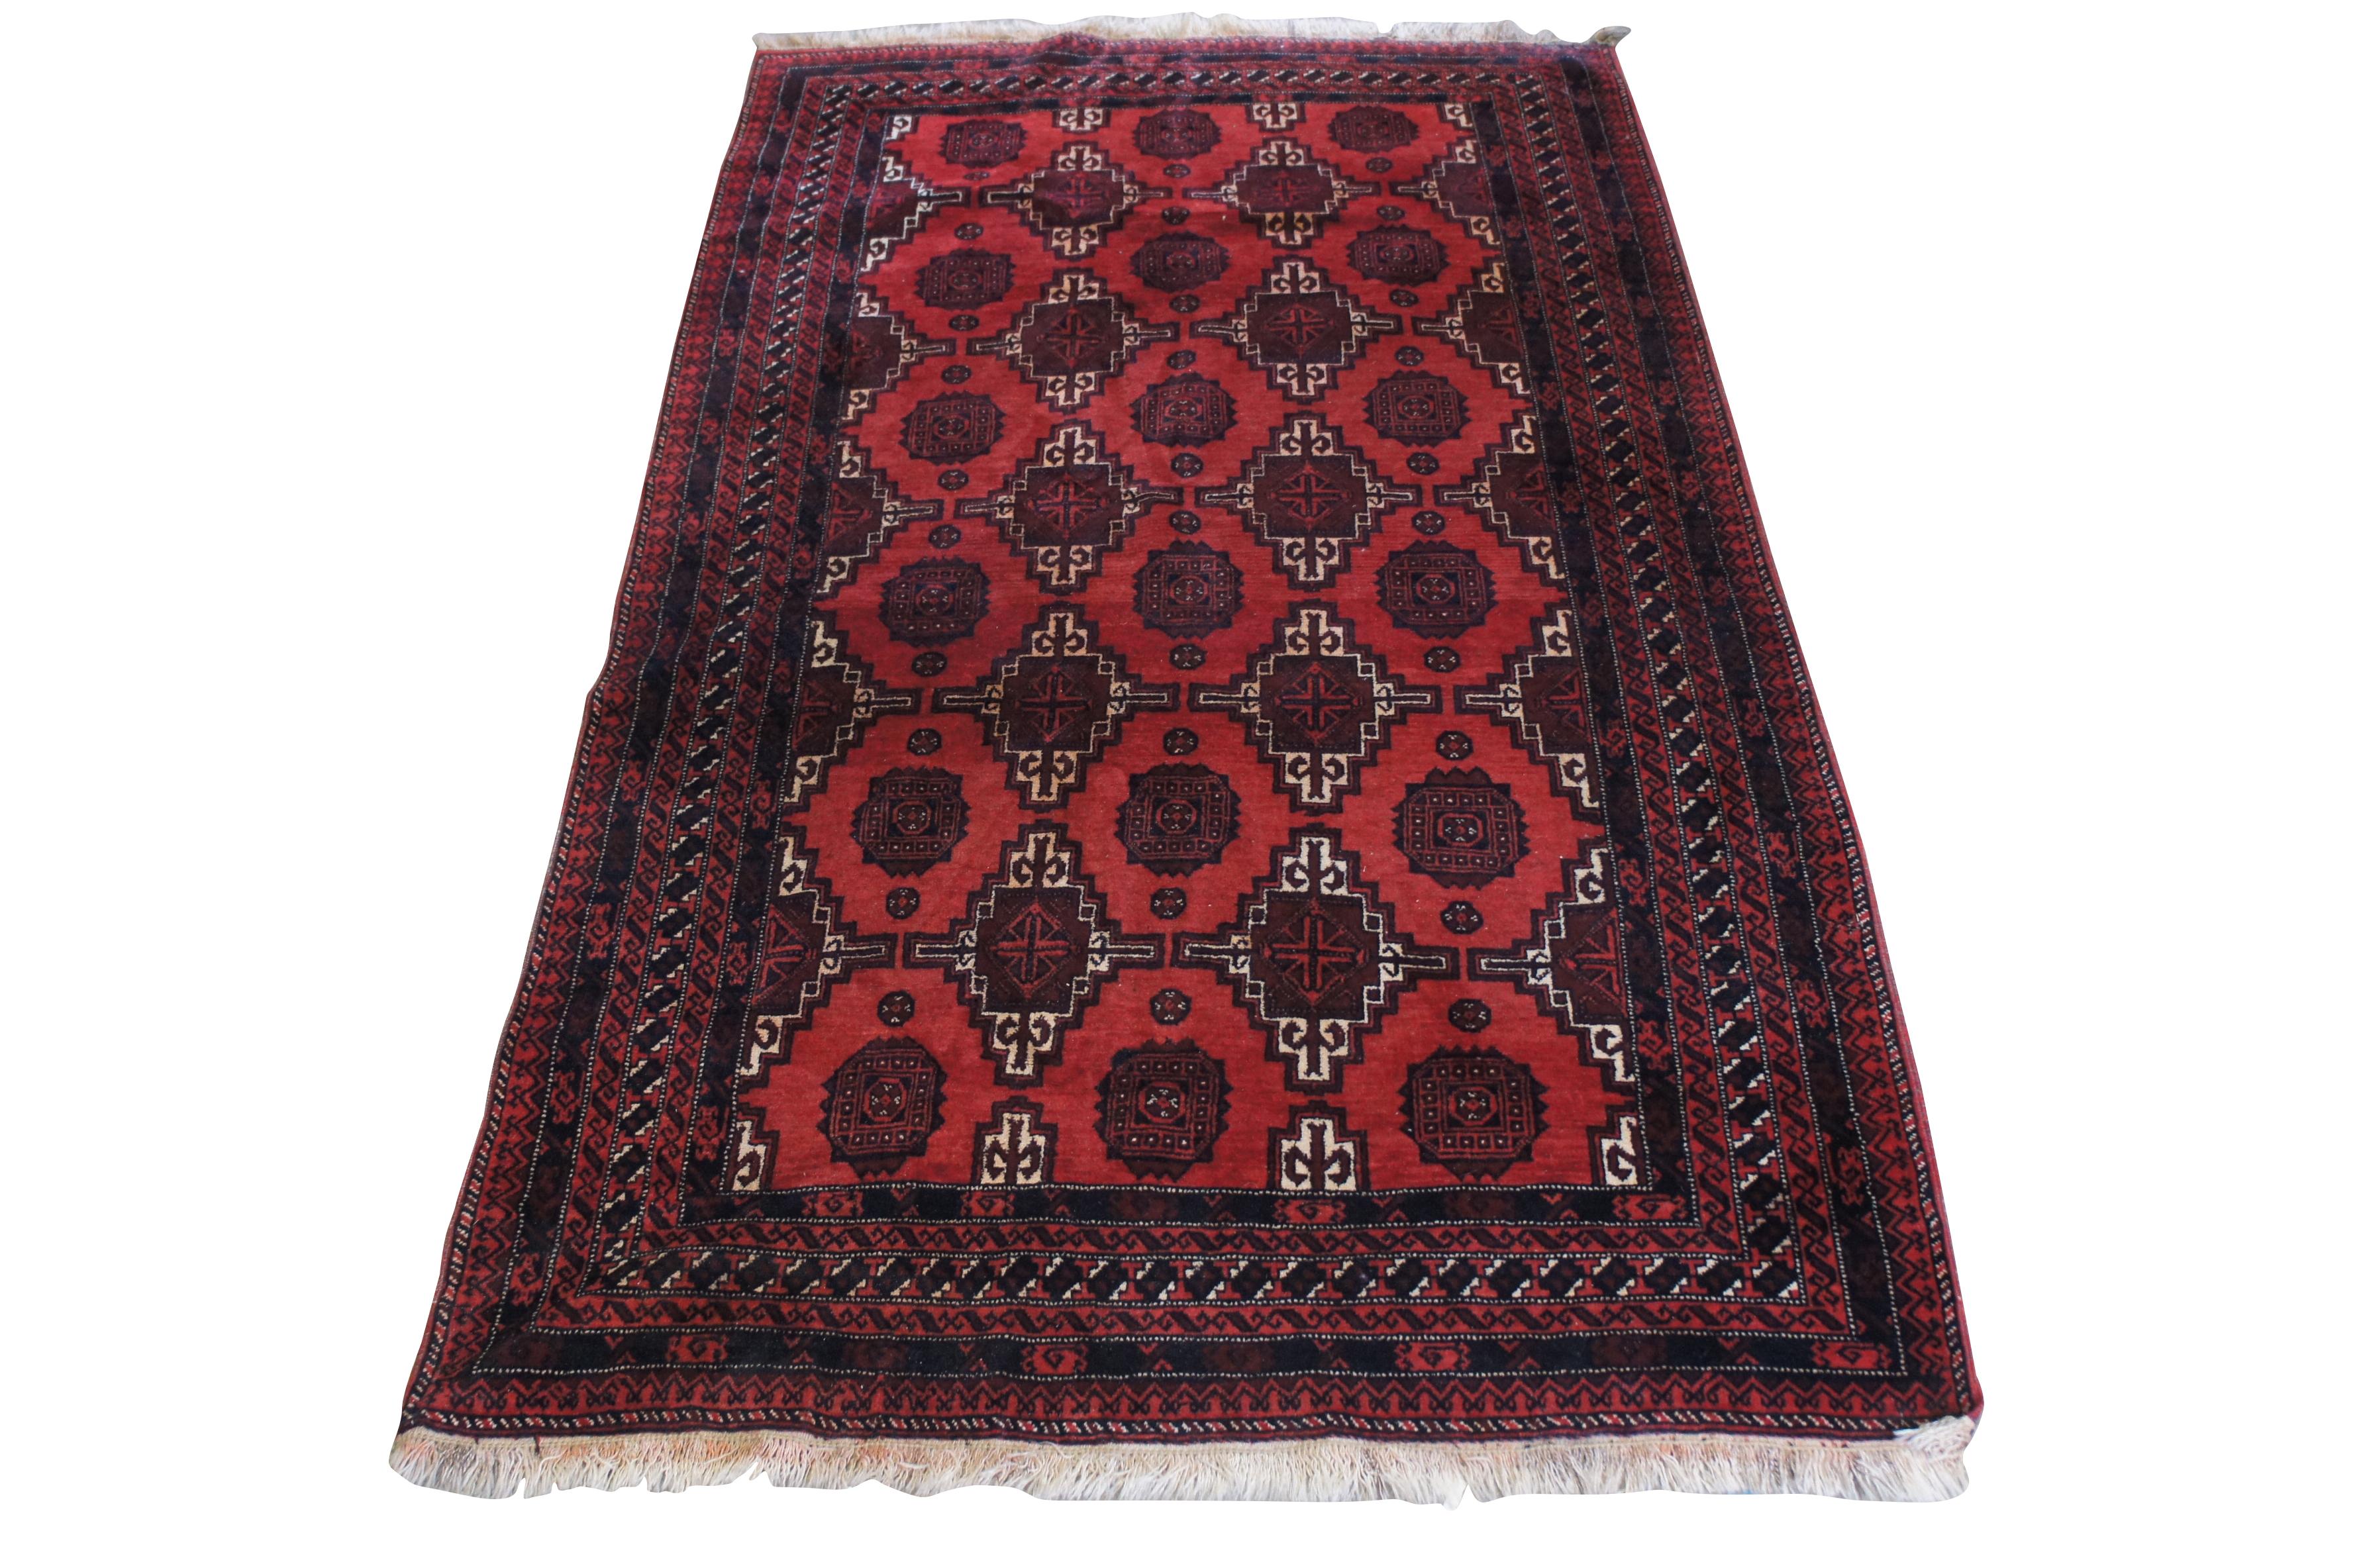 A beautiful hand knotted wool geometric area rug.  Features reds and beige 

Dimensions:
52.5